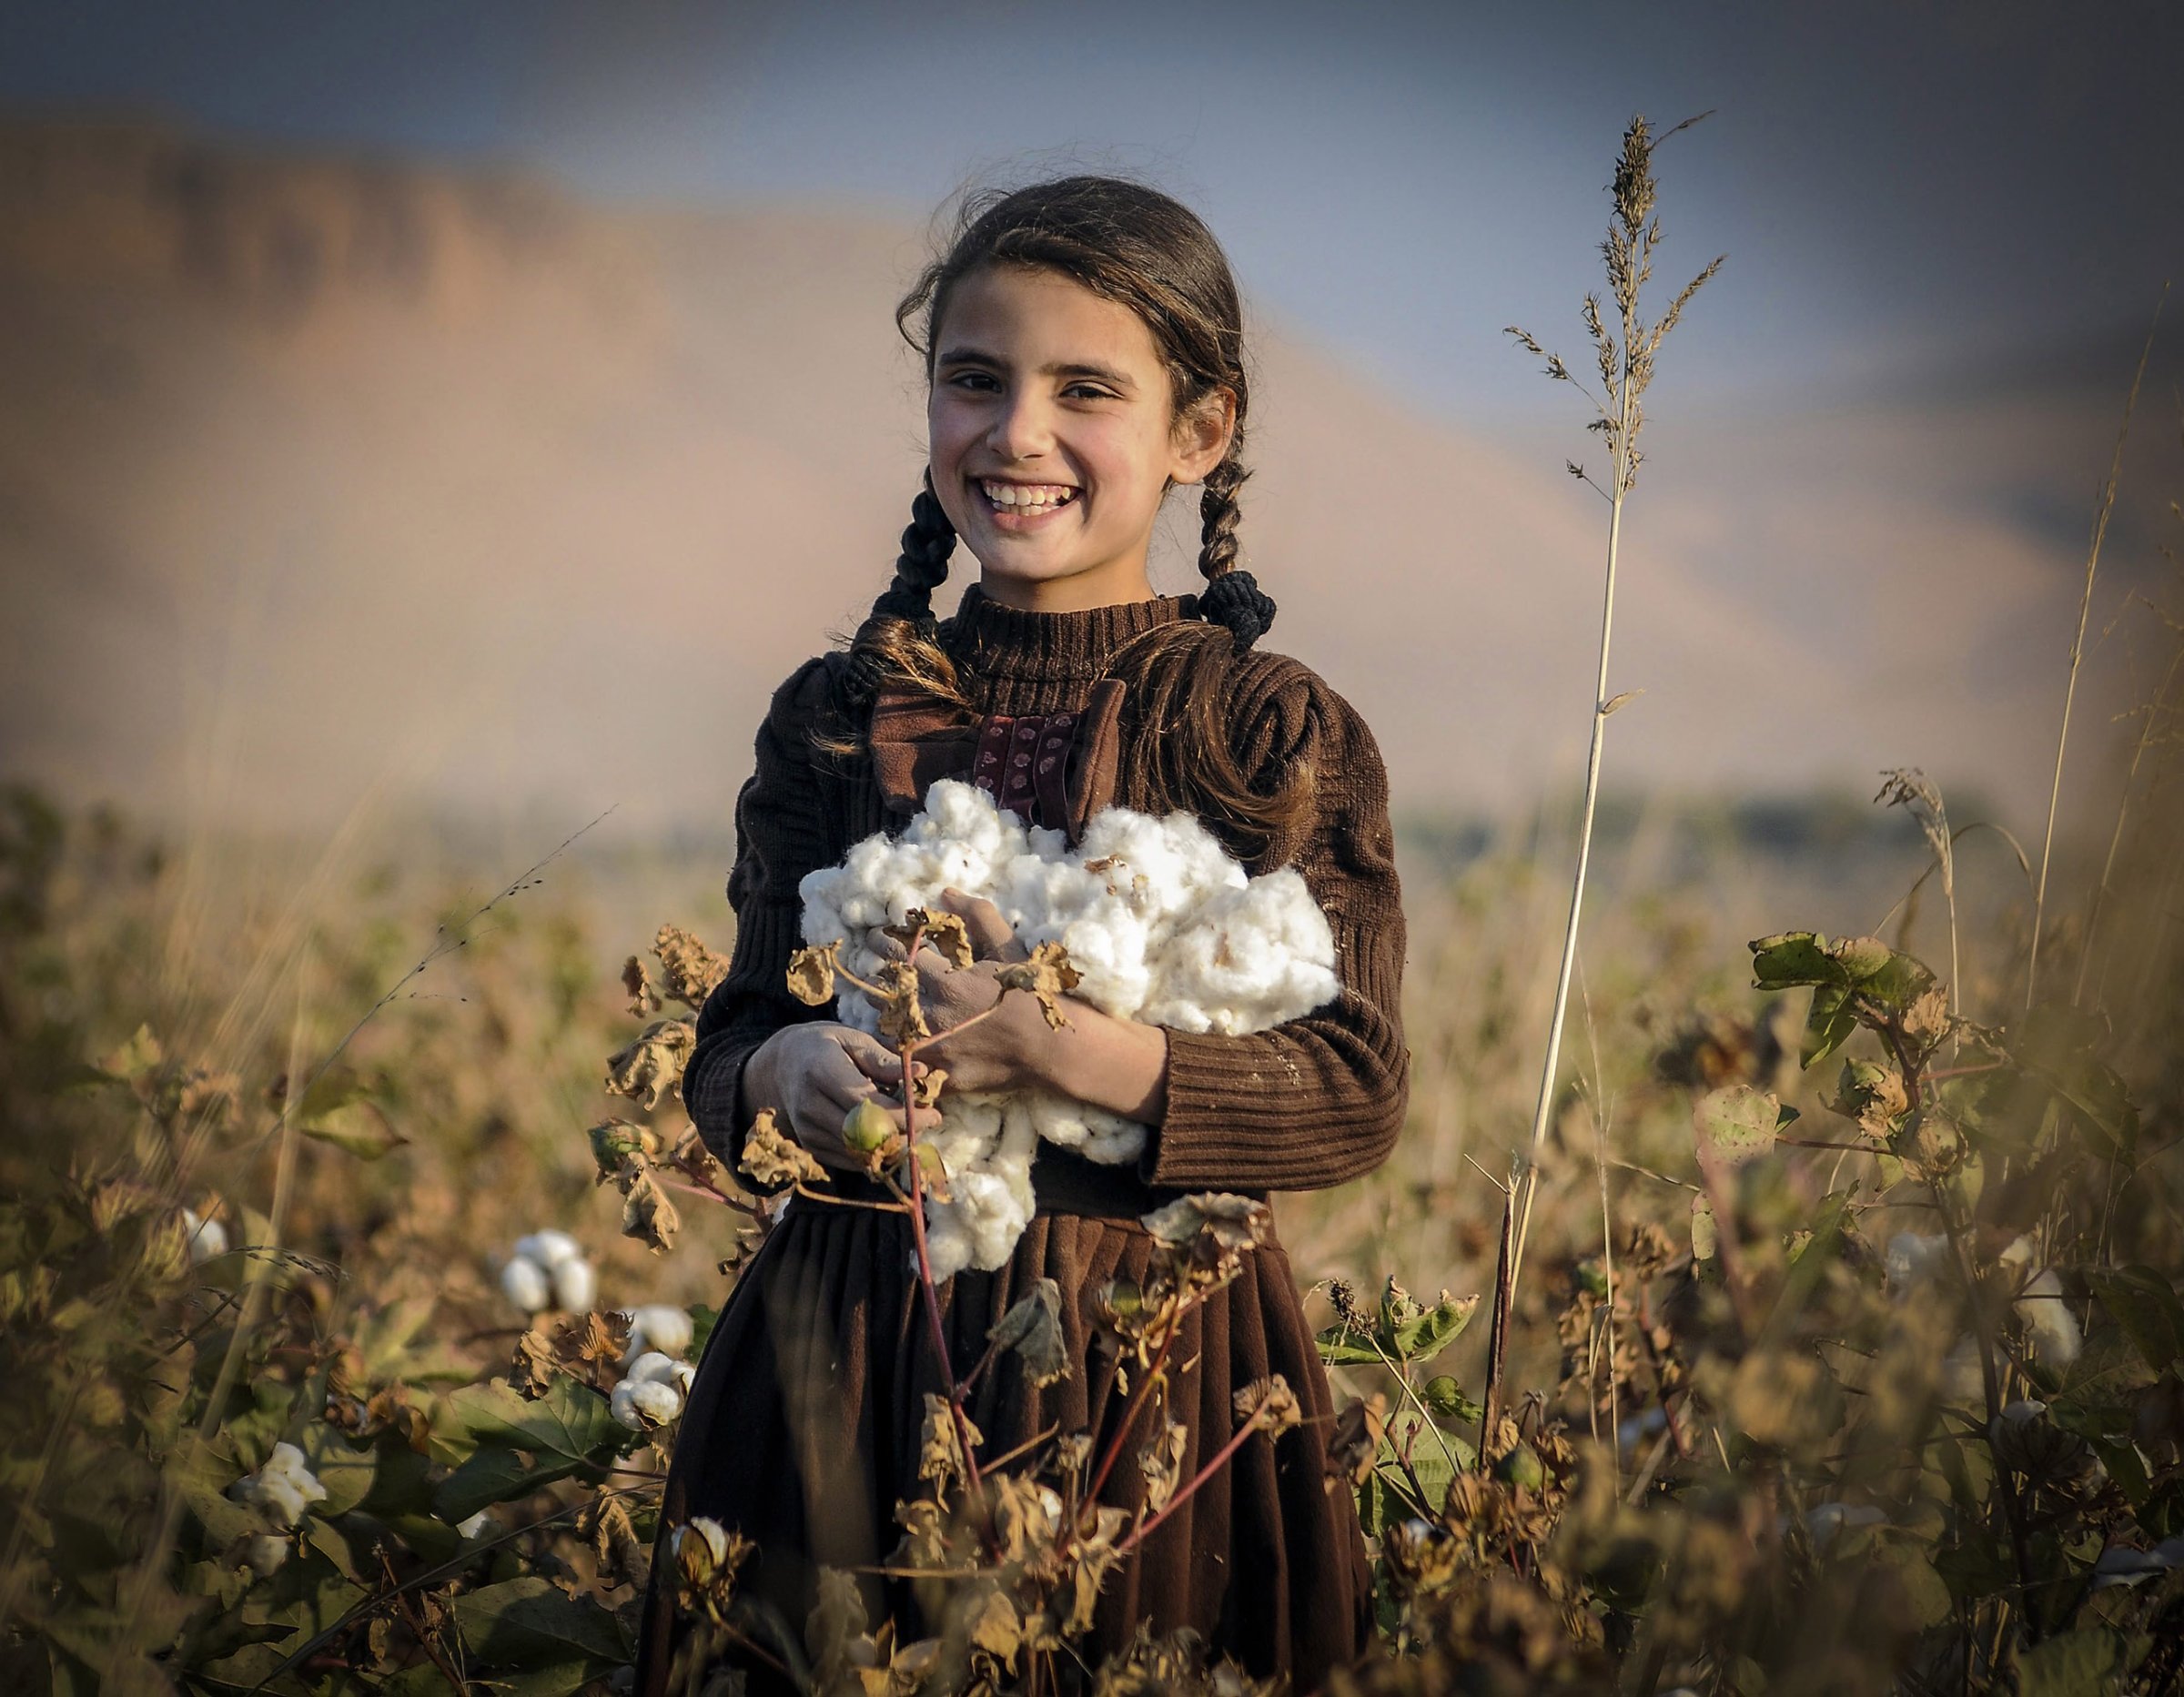 An Afghan girl harvests Cotton buds at a field on the outskirts of Balkh province, Afghanistan on Nov. 15, 2014.